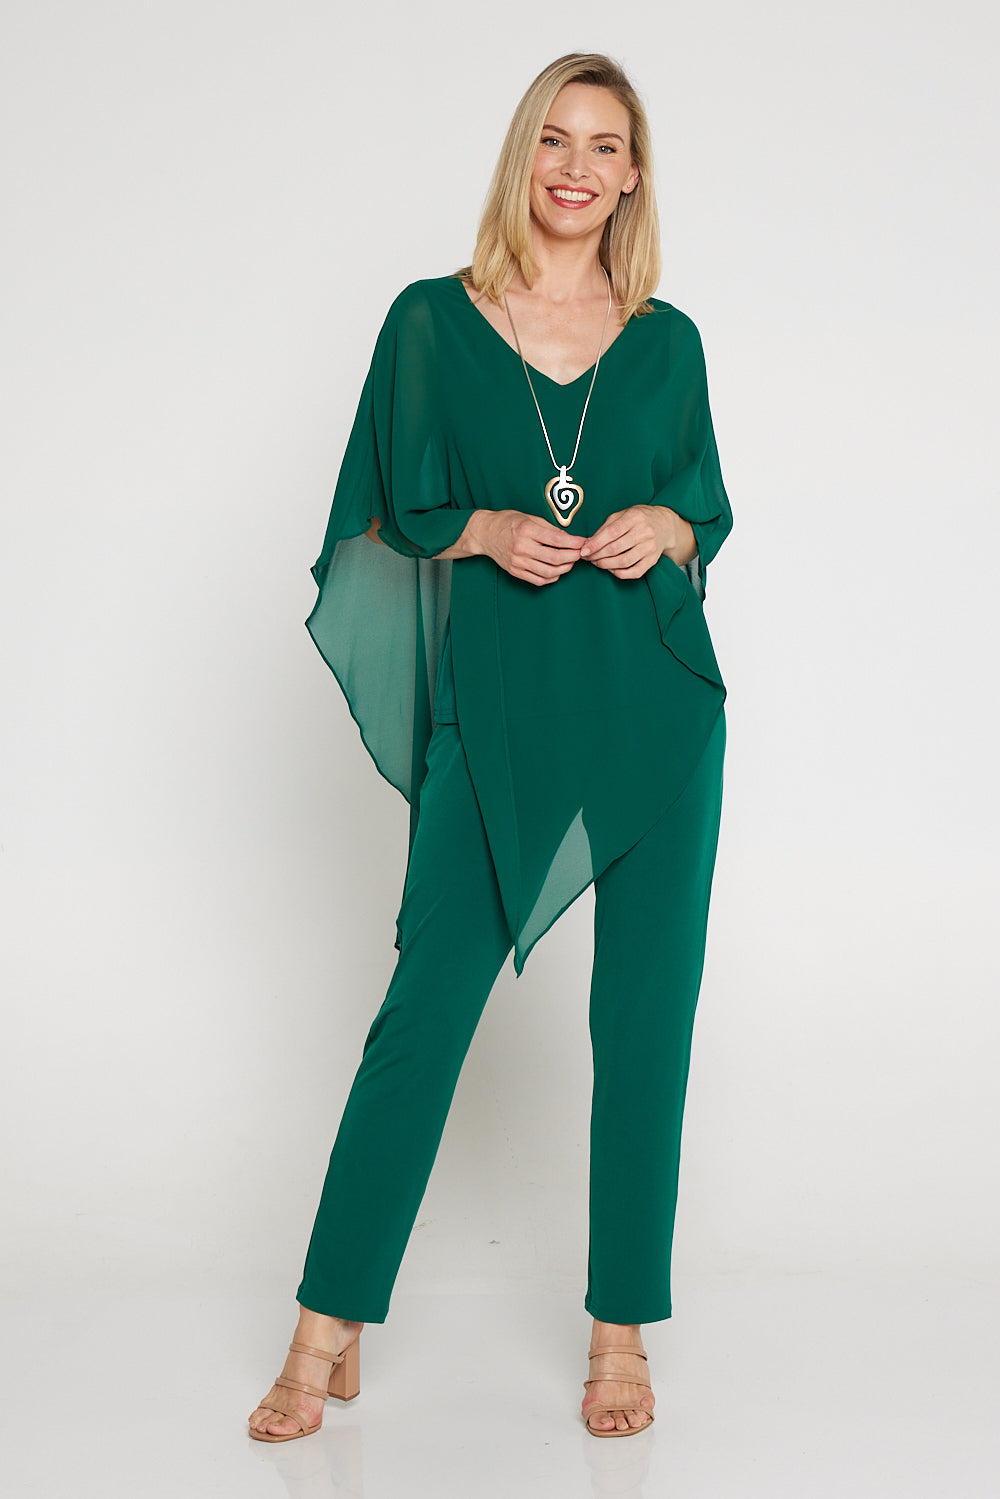 Gianna Pants - Forest Green, Mature Women's Clothing